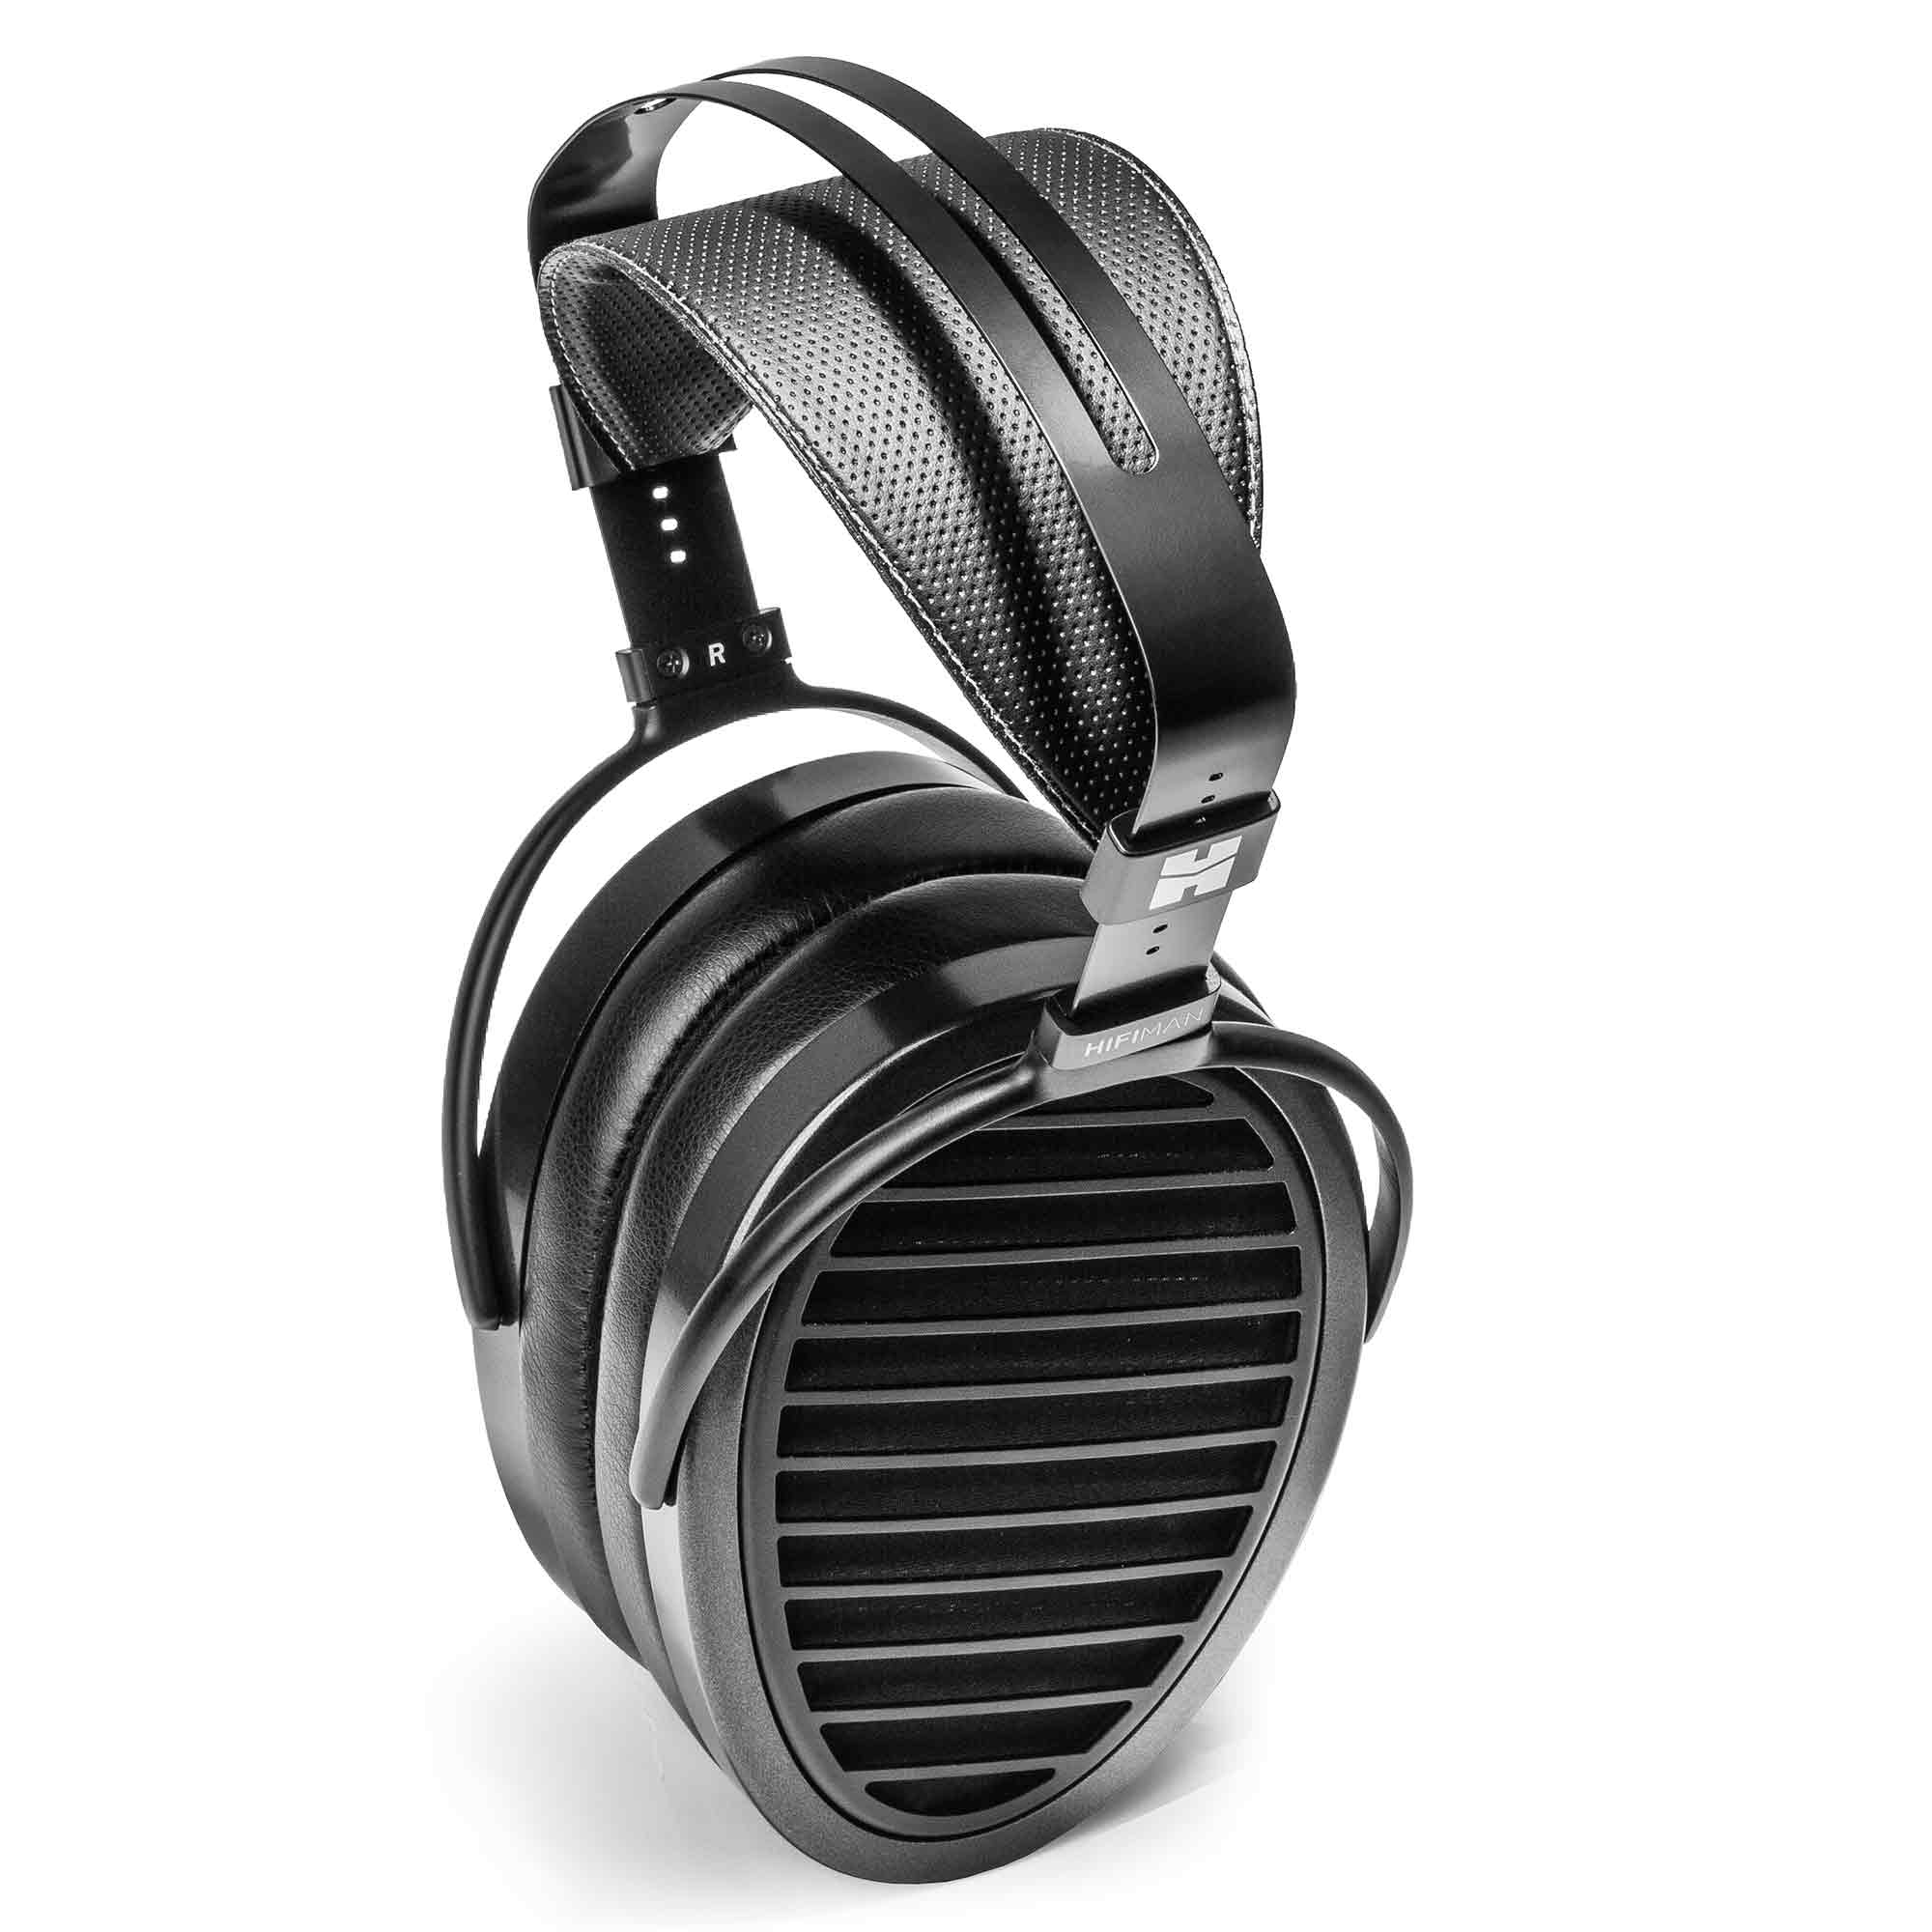 HIFIMAN SUNDARA Hi-Fi Headphone with 3.5mm Connectors, Planar Magnetic,  Comfortable Fit with Updated Earpads-Black, 2020 Version